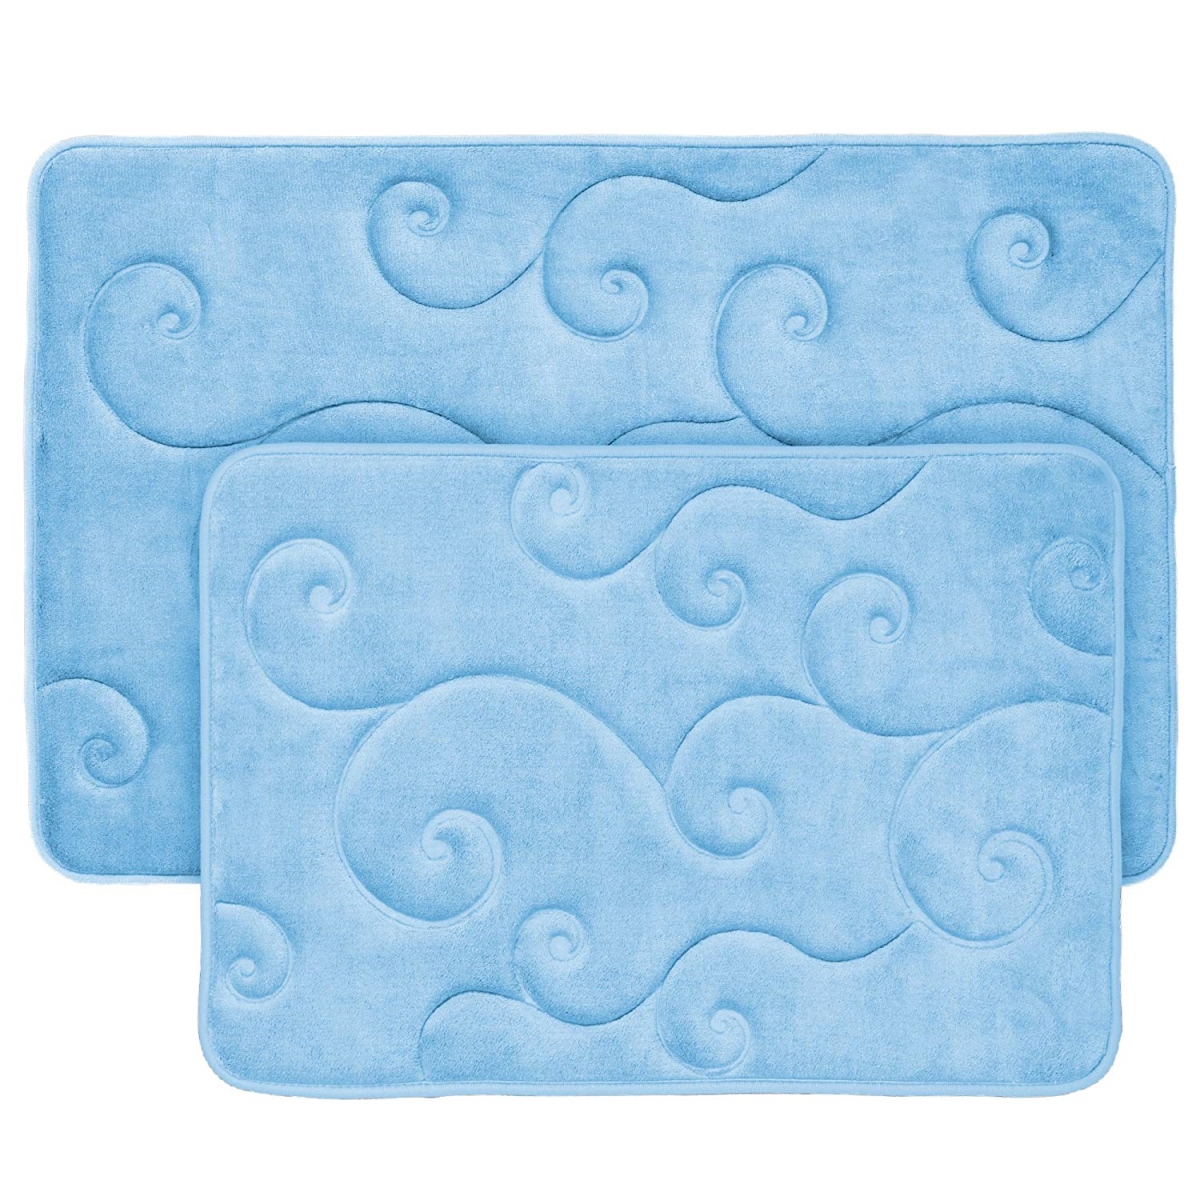 Picture of Bedford Home 67A-36796 2 Piece Memory Foam Bath Mat Set by Coral Fleece Embossed Pattern - Blue